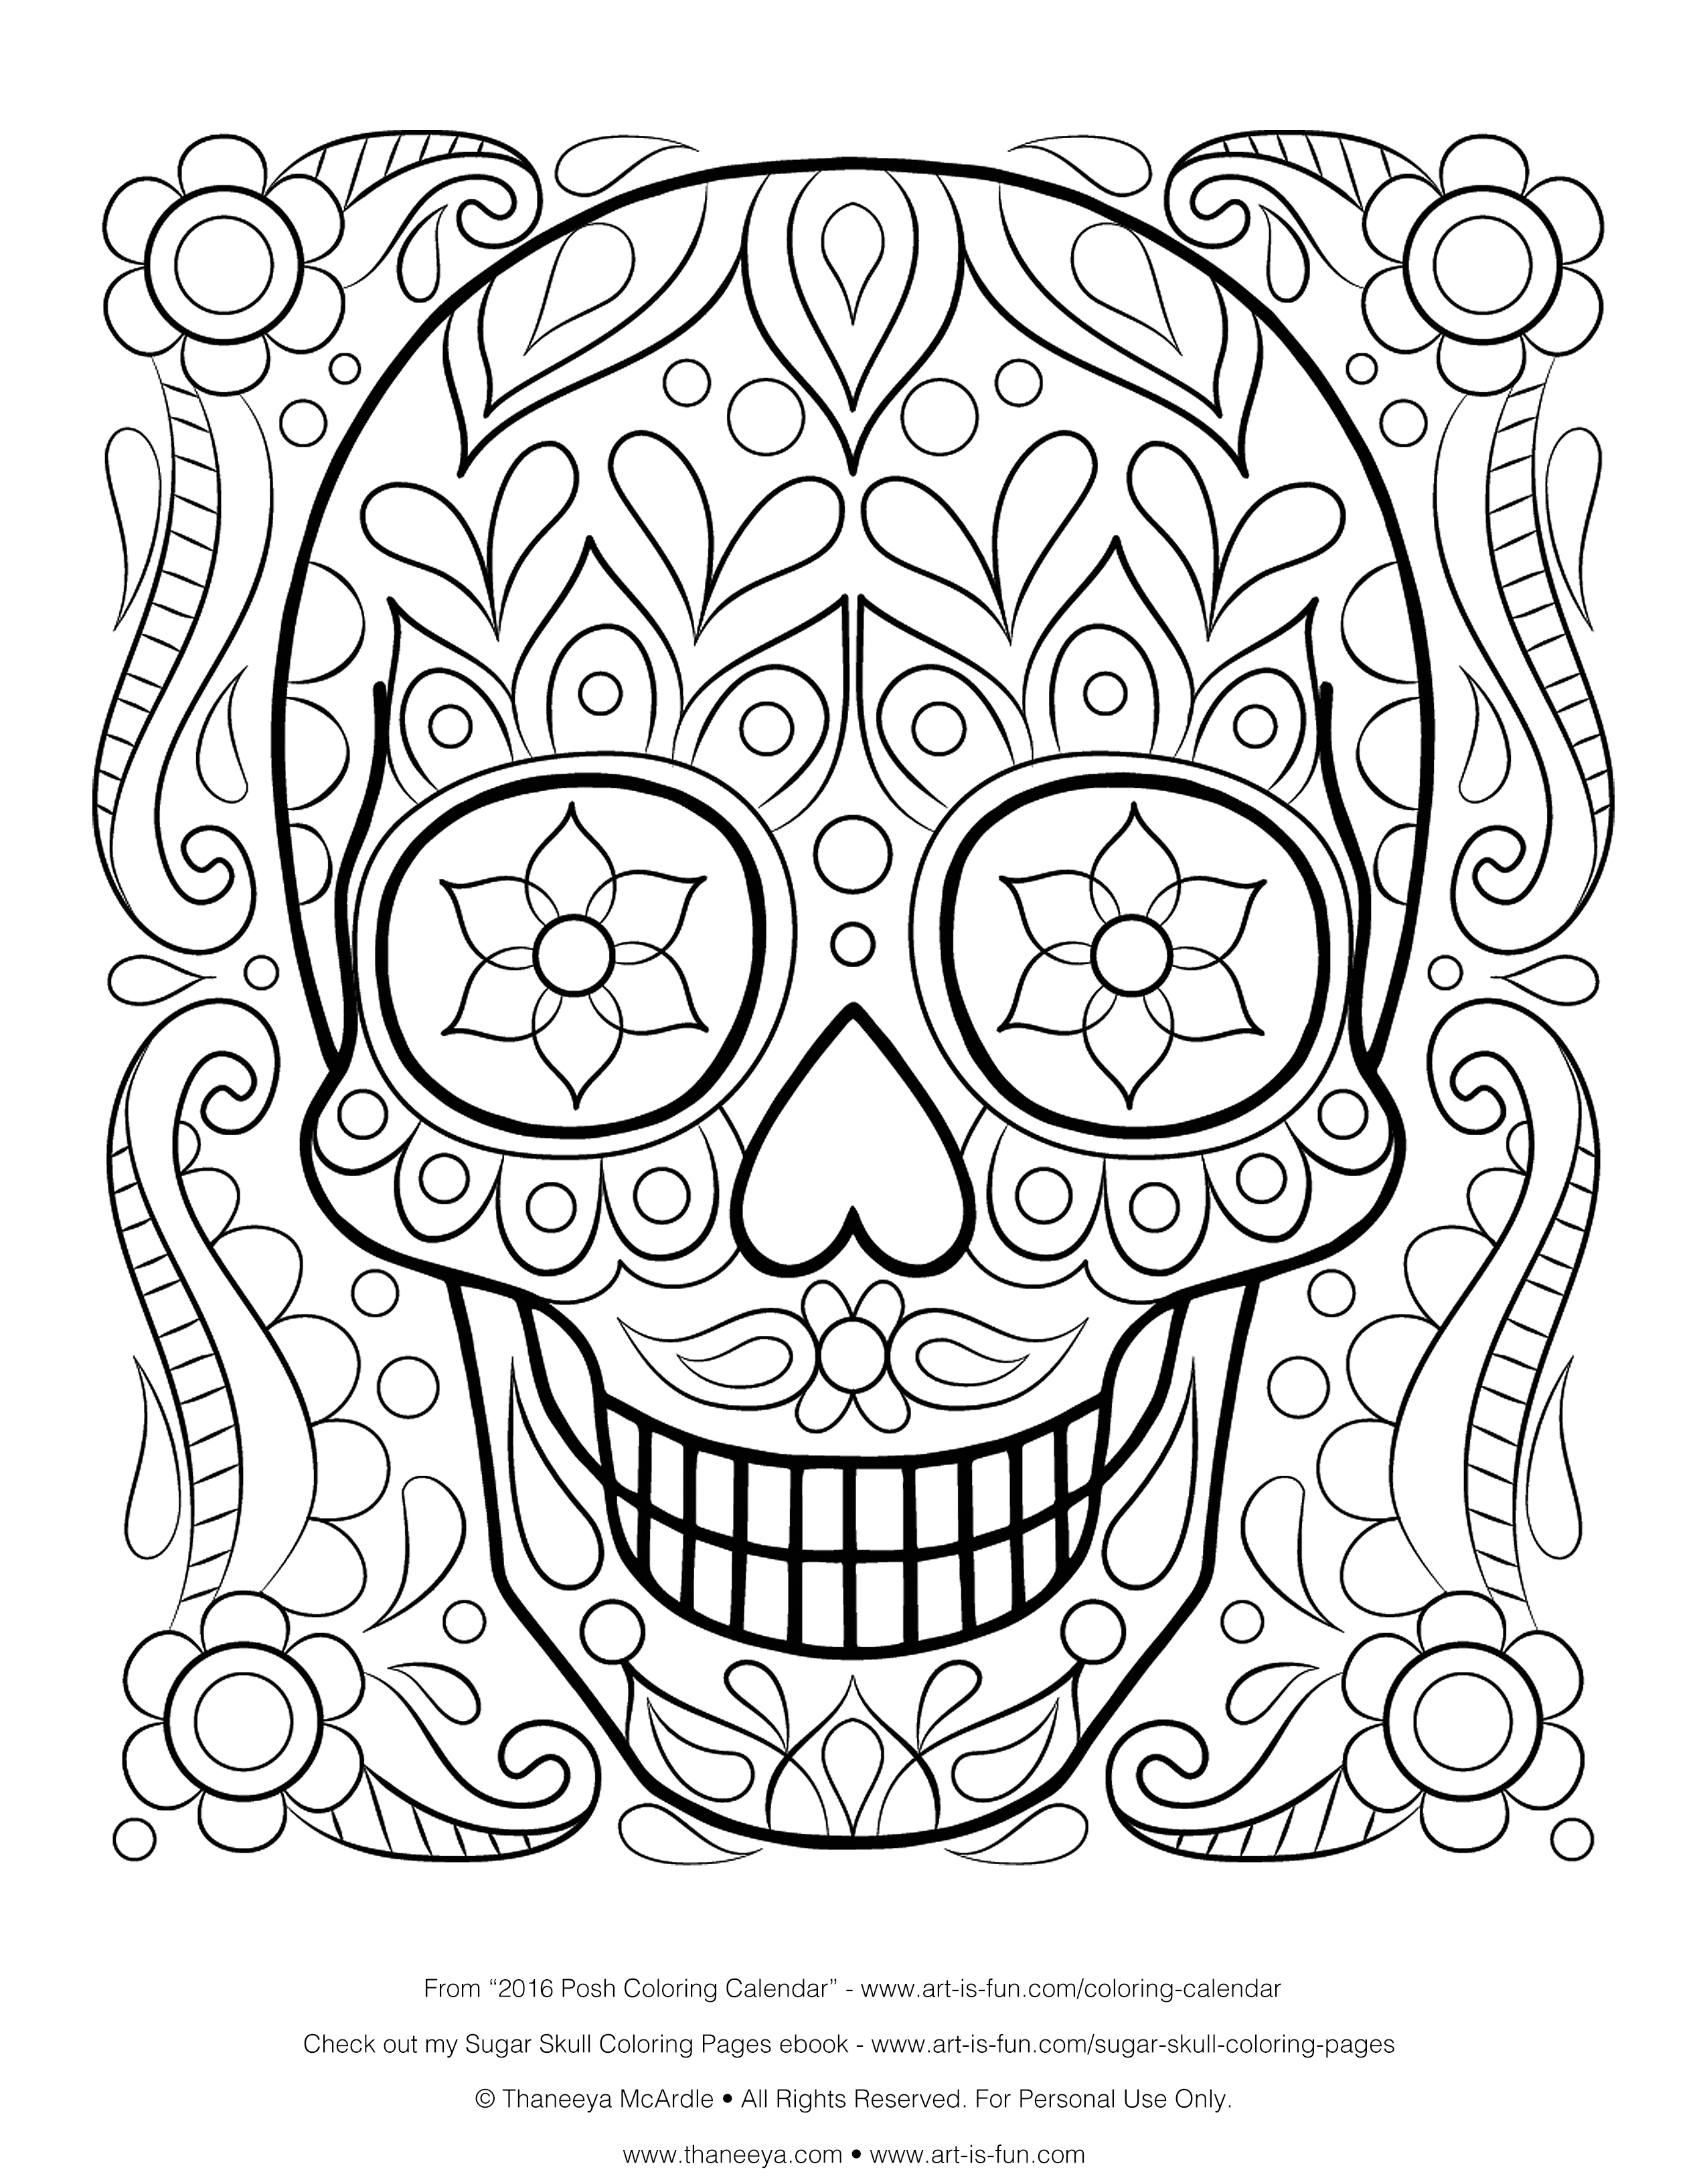 Adult Coloring Pages, Skulls - Coloring Home